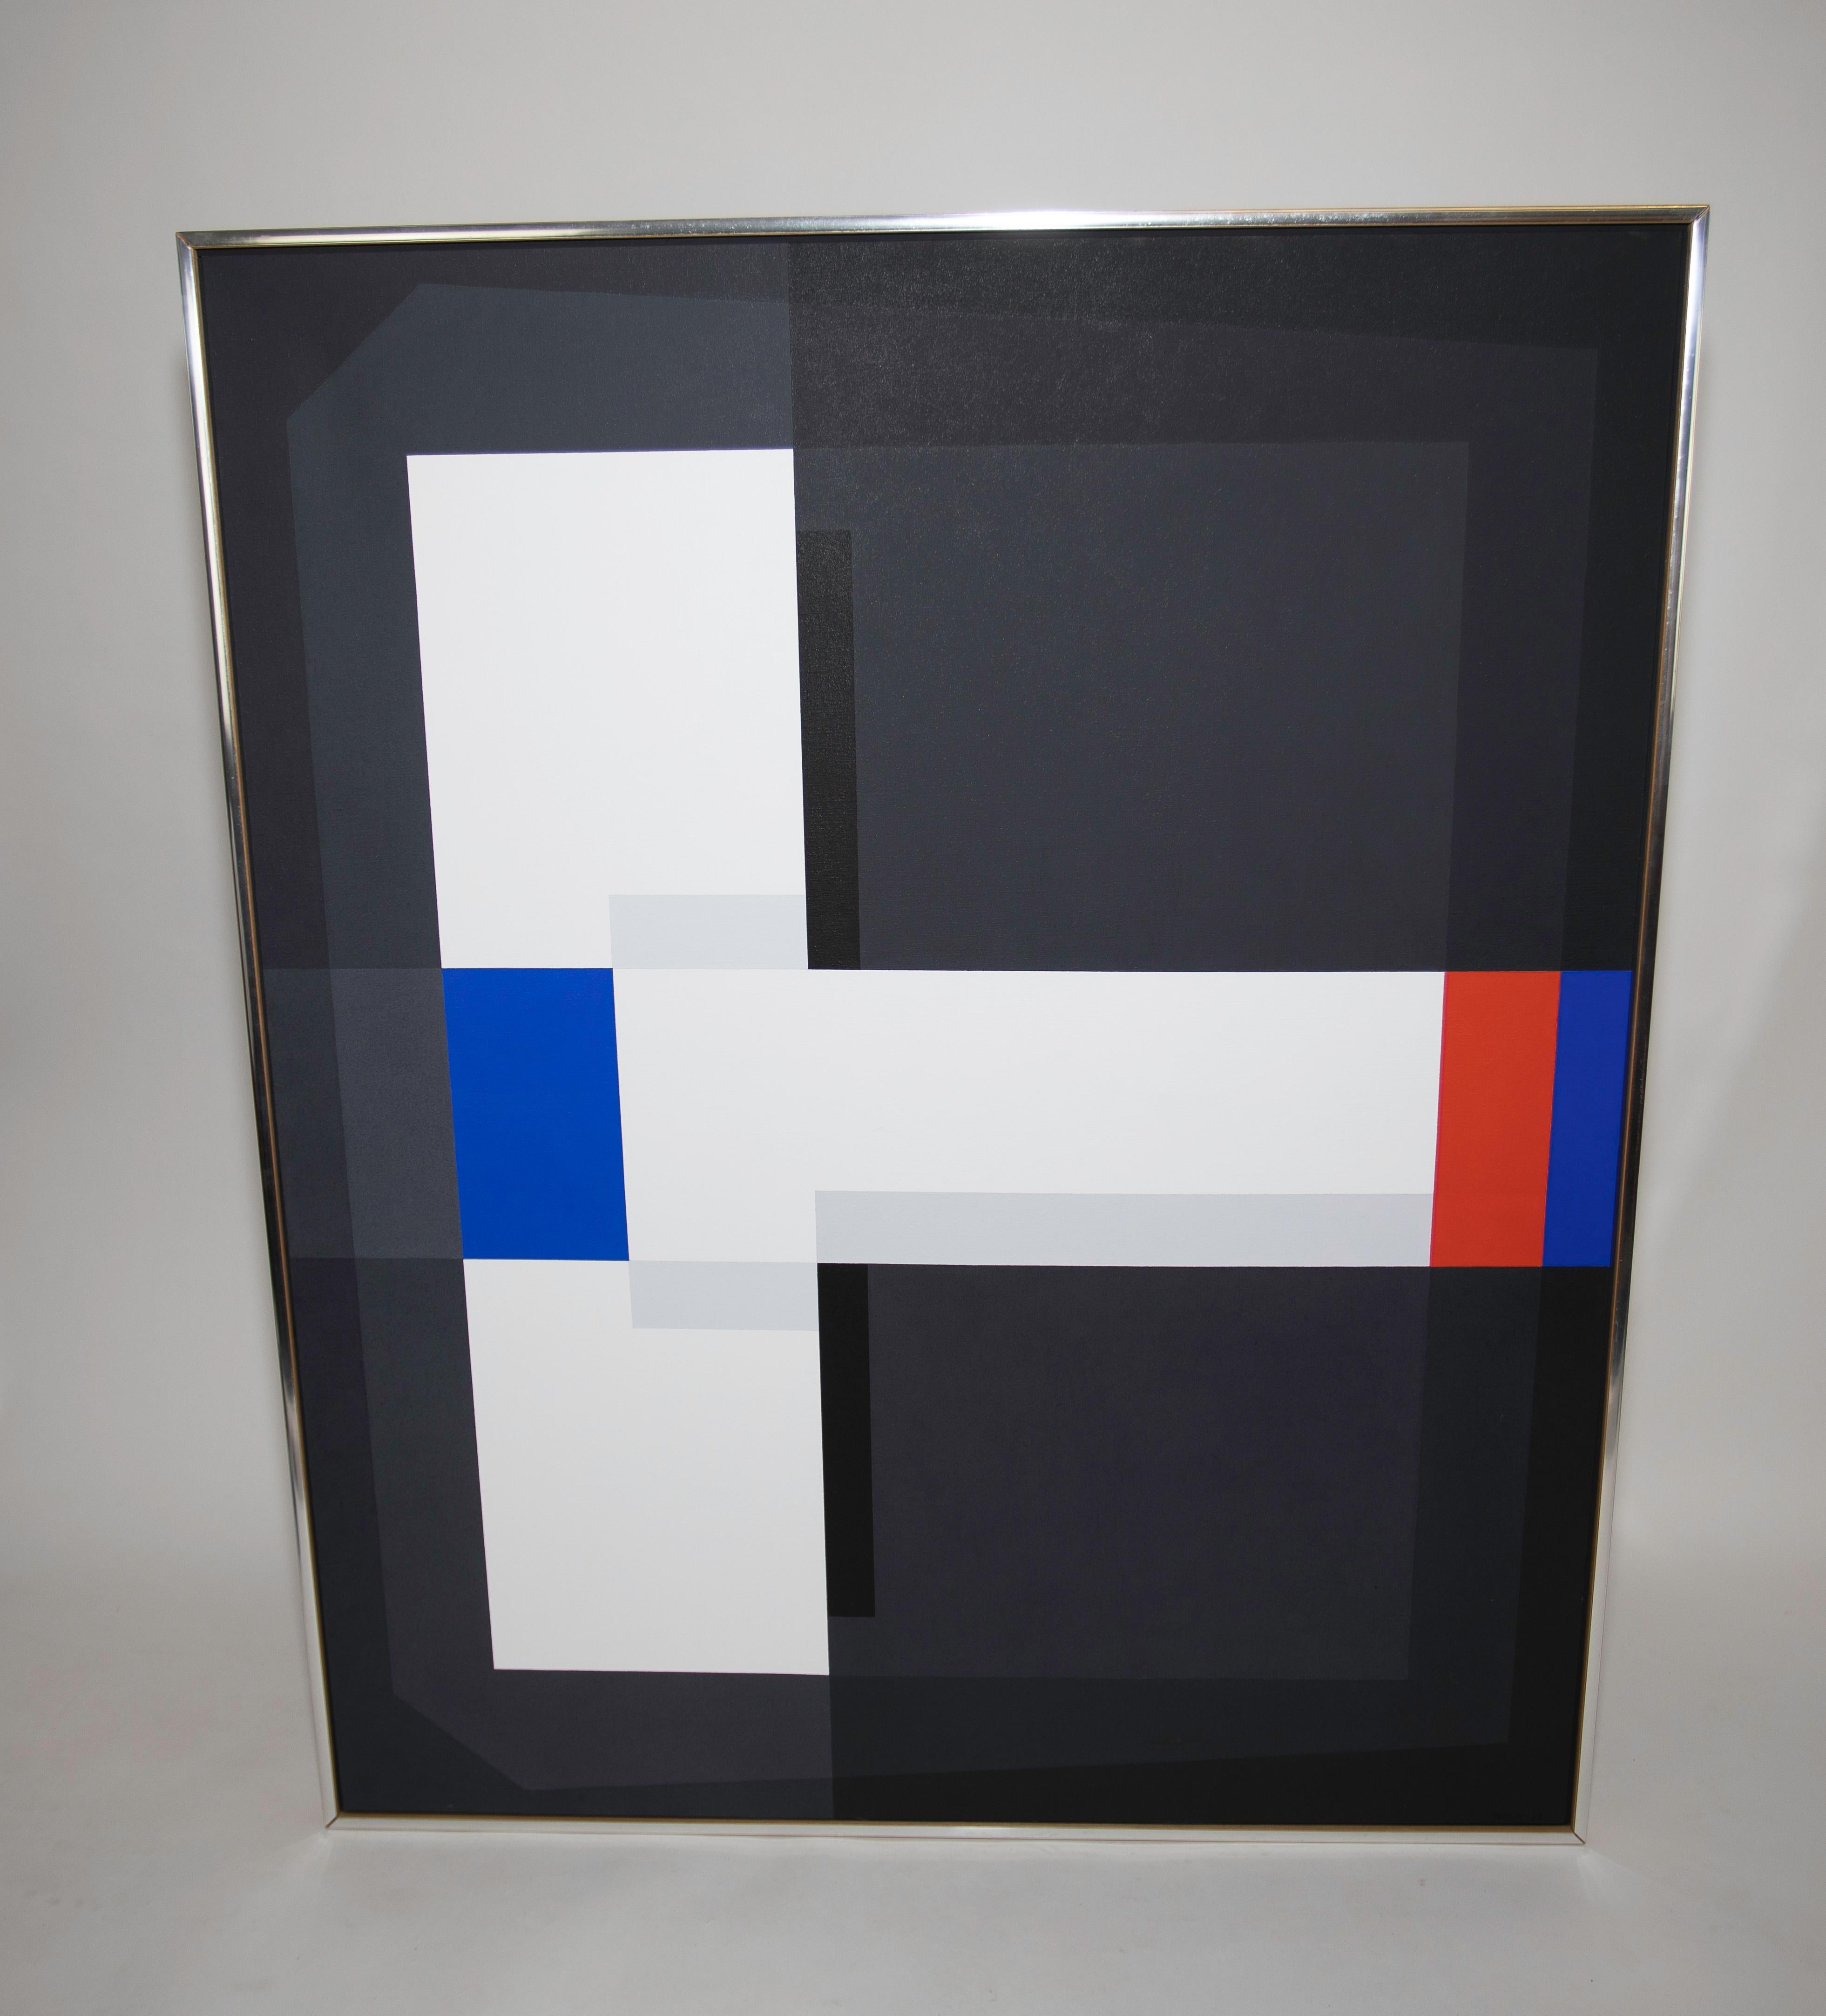 Roger-Francois thepot acrylic on canvas.
Signed and dated
A fine example of the artists' Geometric Abstraction.